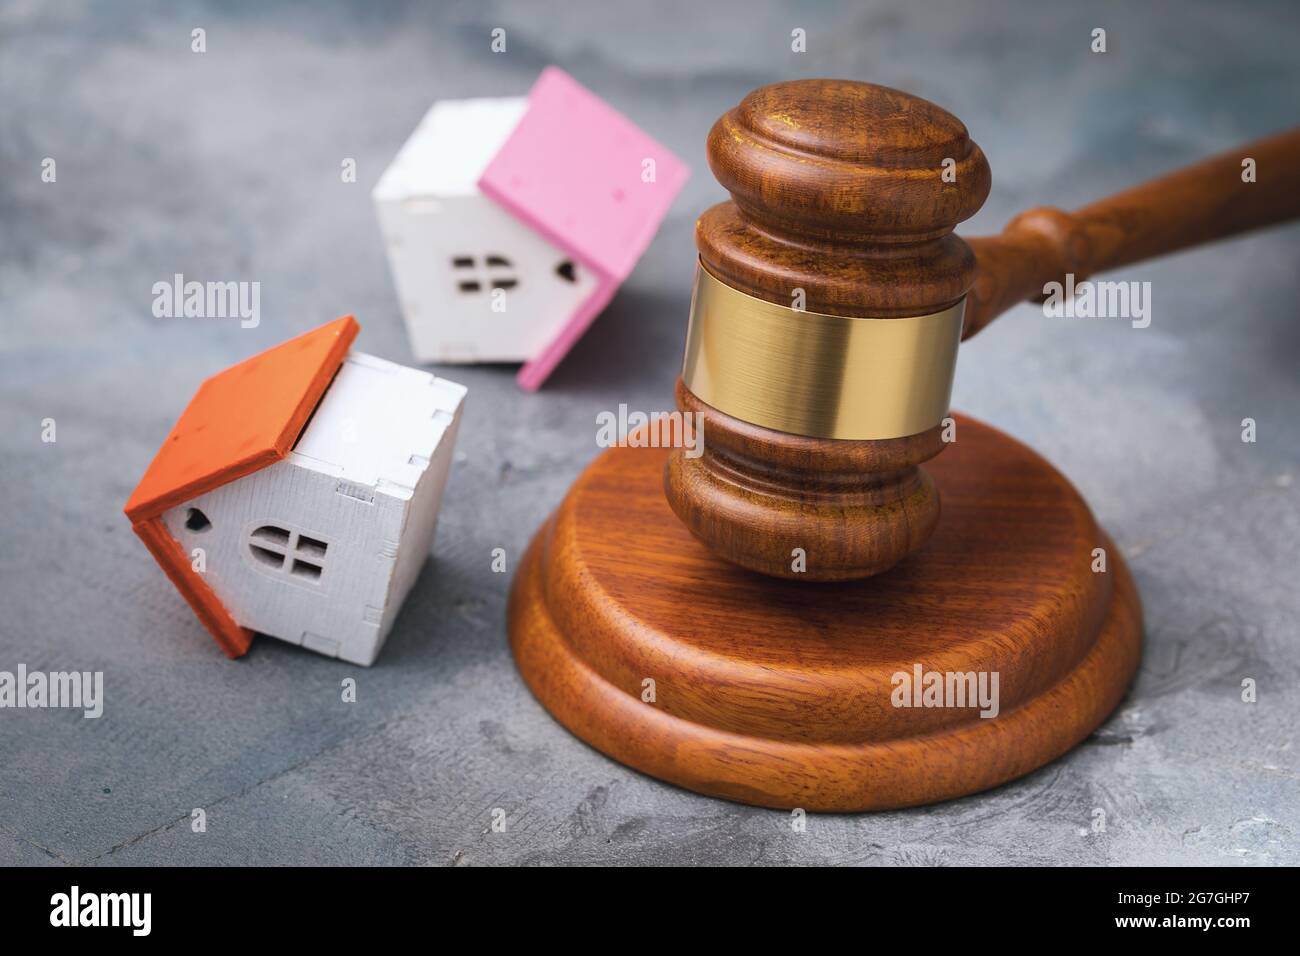 Auction hammer and overturned toy houses on the table, real estate sale concept Stock Photo